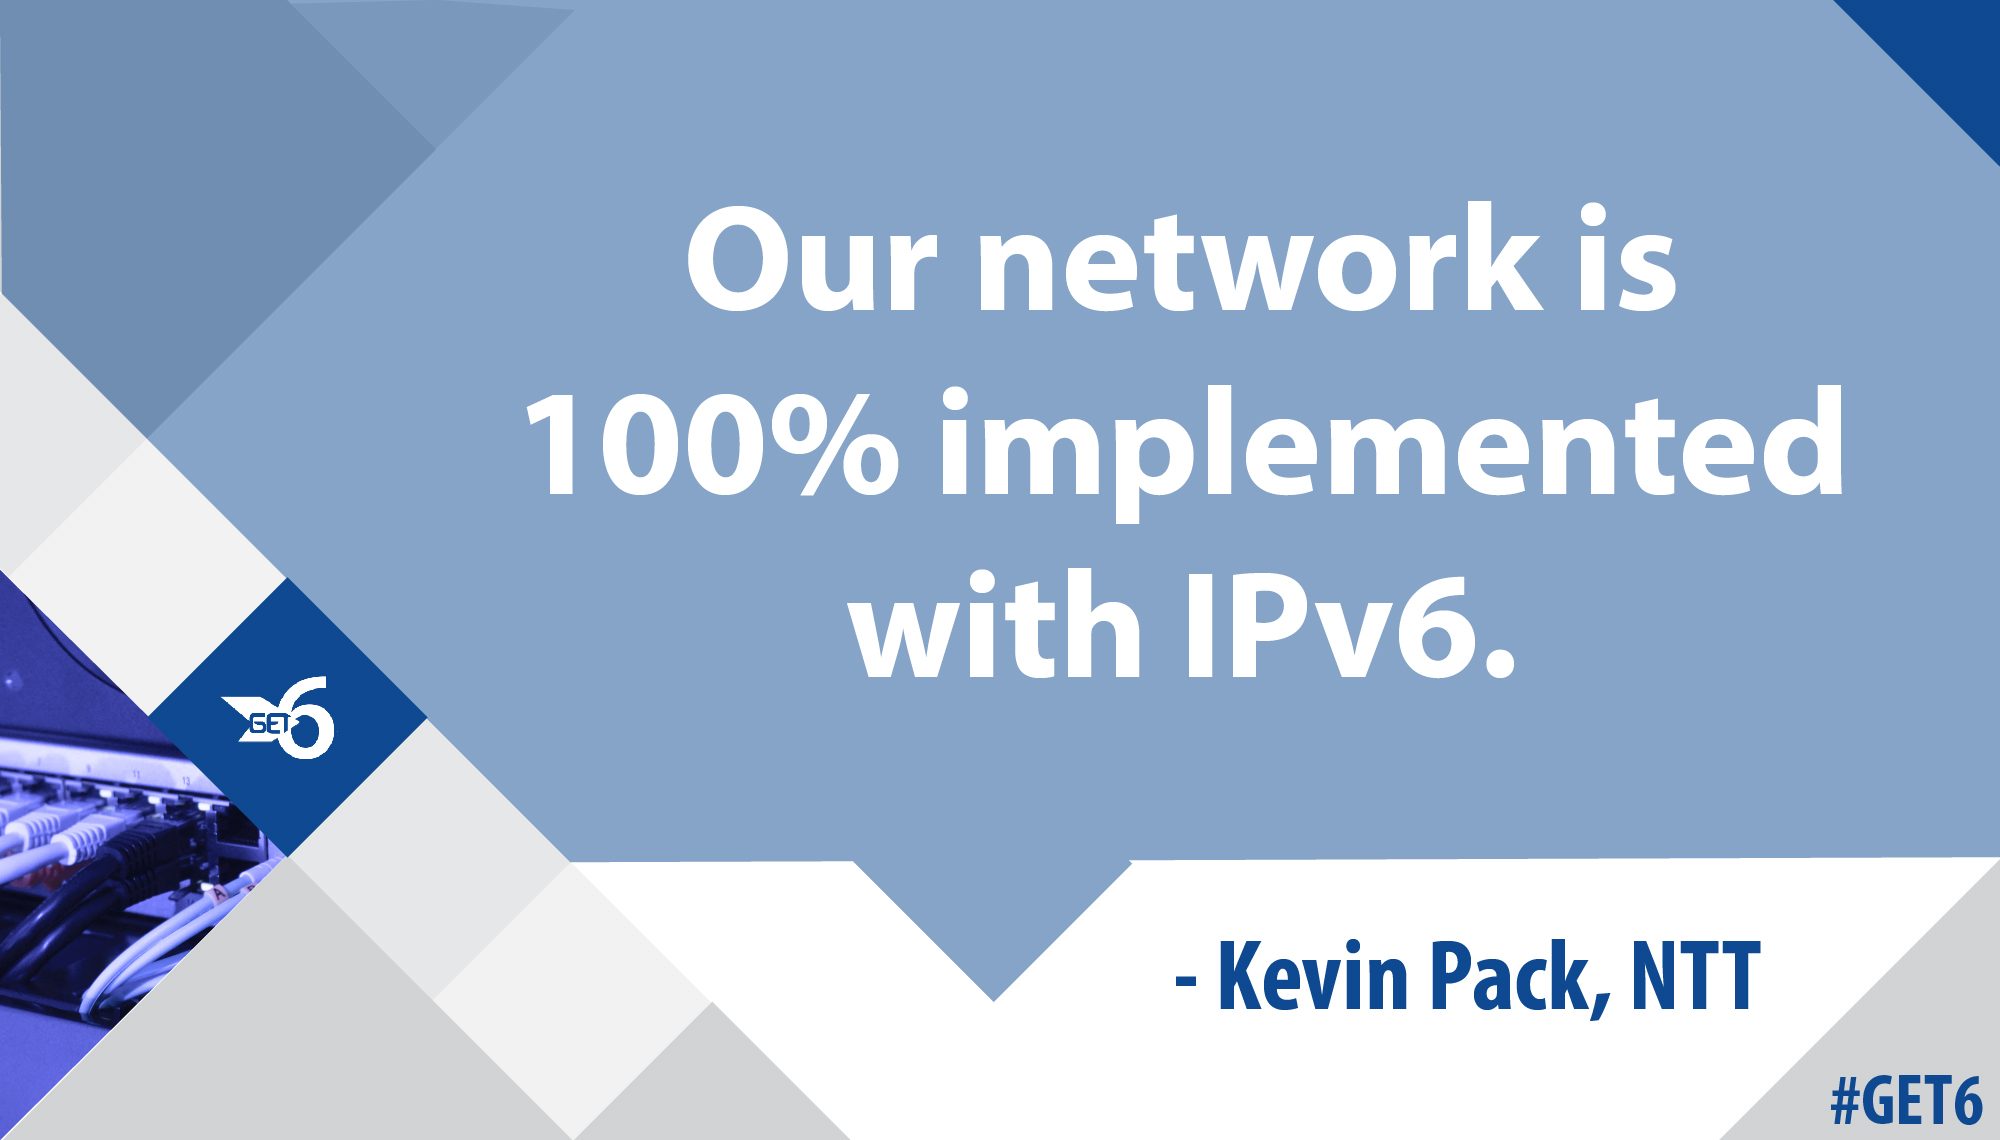 “Our network is 100% implemented with IPv6.”